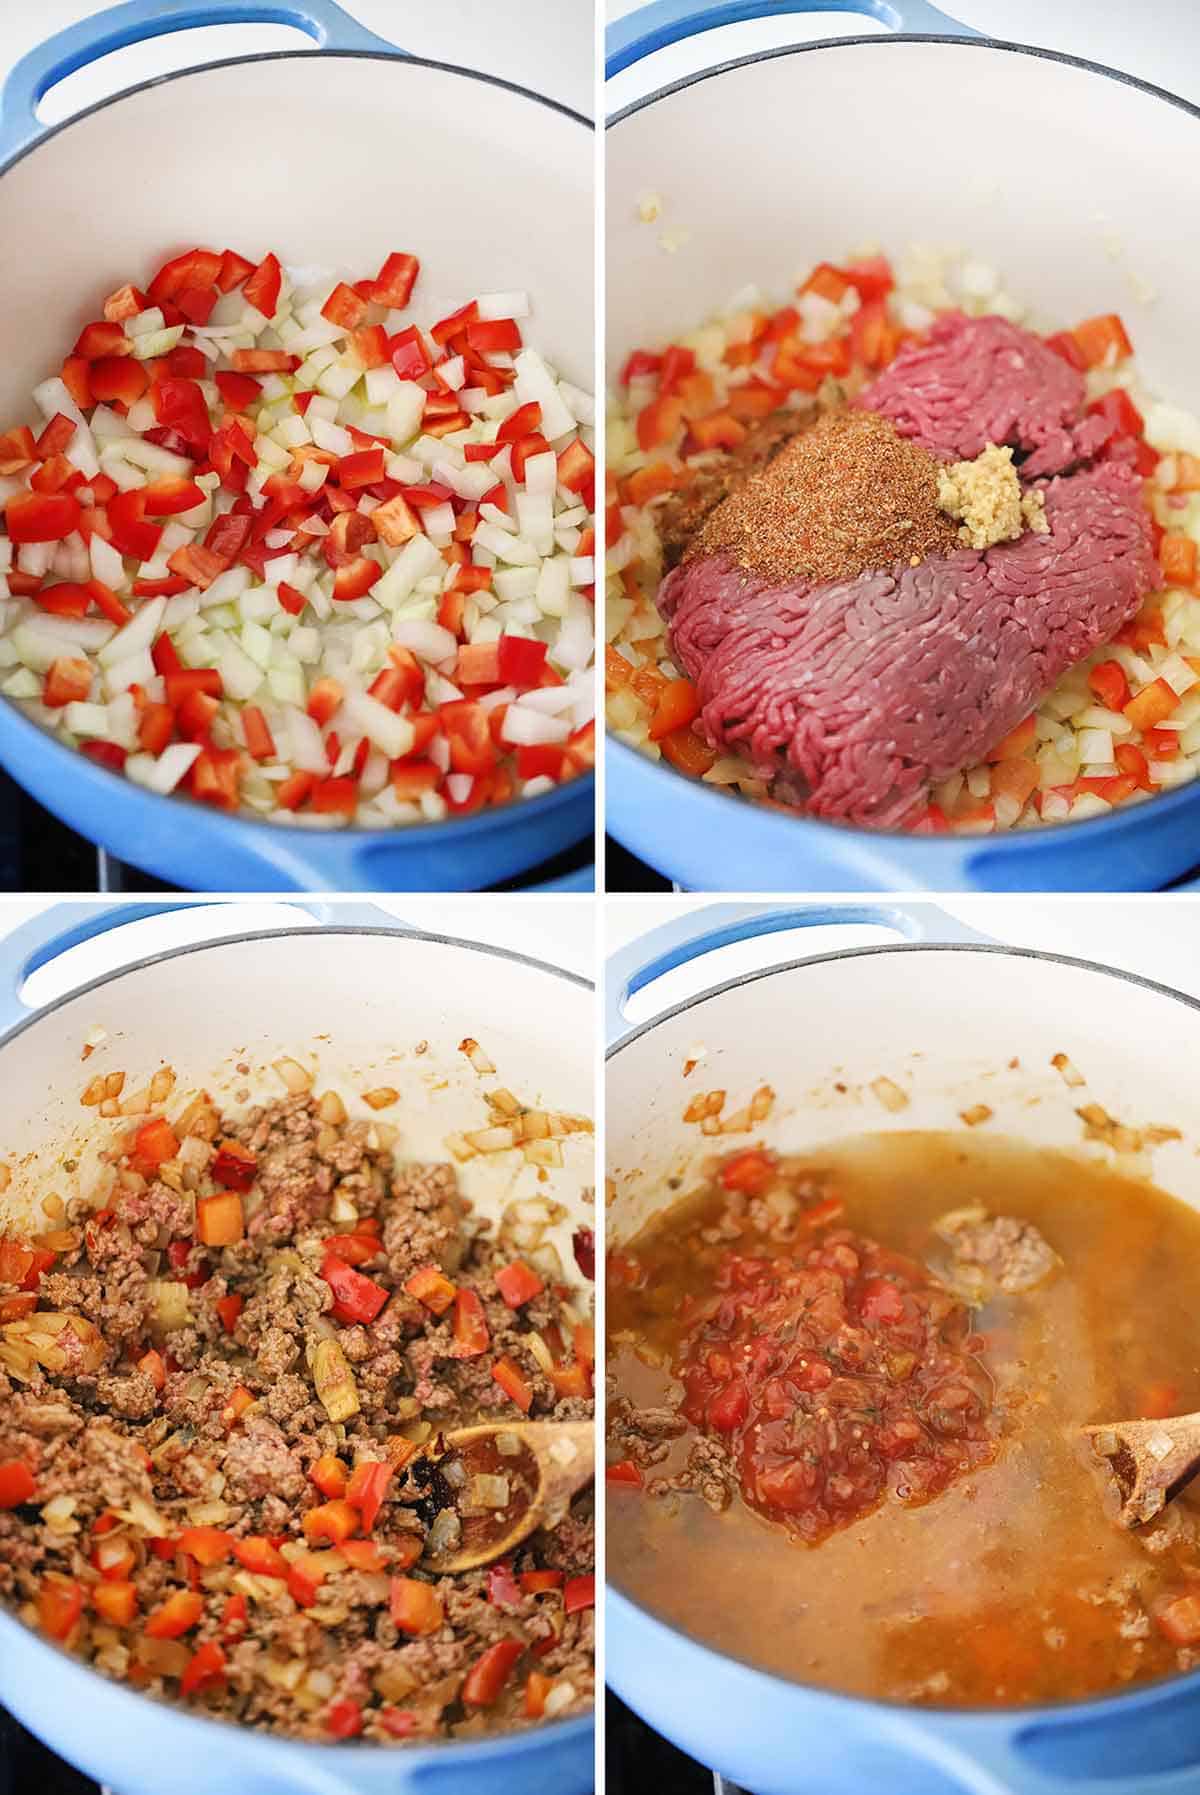 Process collage showing cooking peppers and onions in a dutch oven, adding ground beef, seasoning, and salsa.